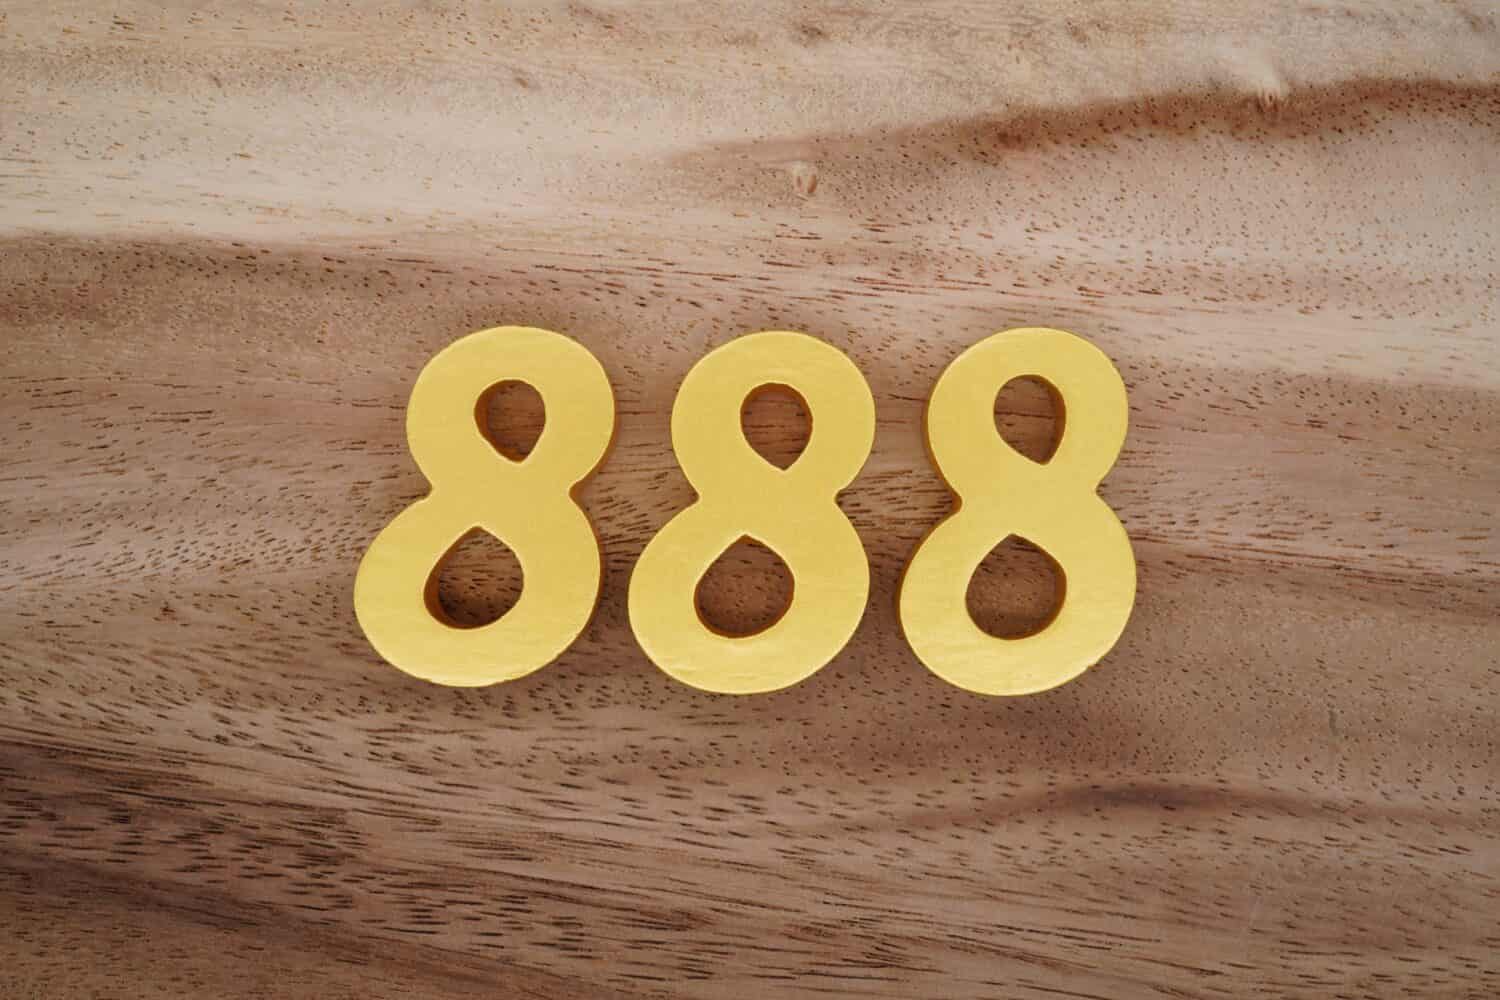 Wooden Arabic numerals 888 painted in gold on a dark brown and white patterned plank background.